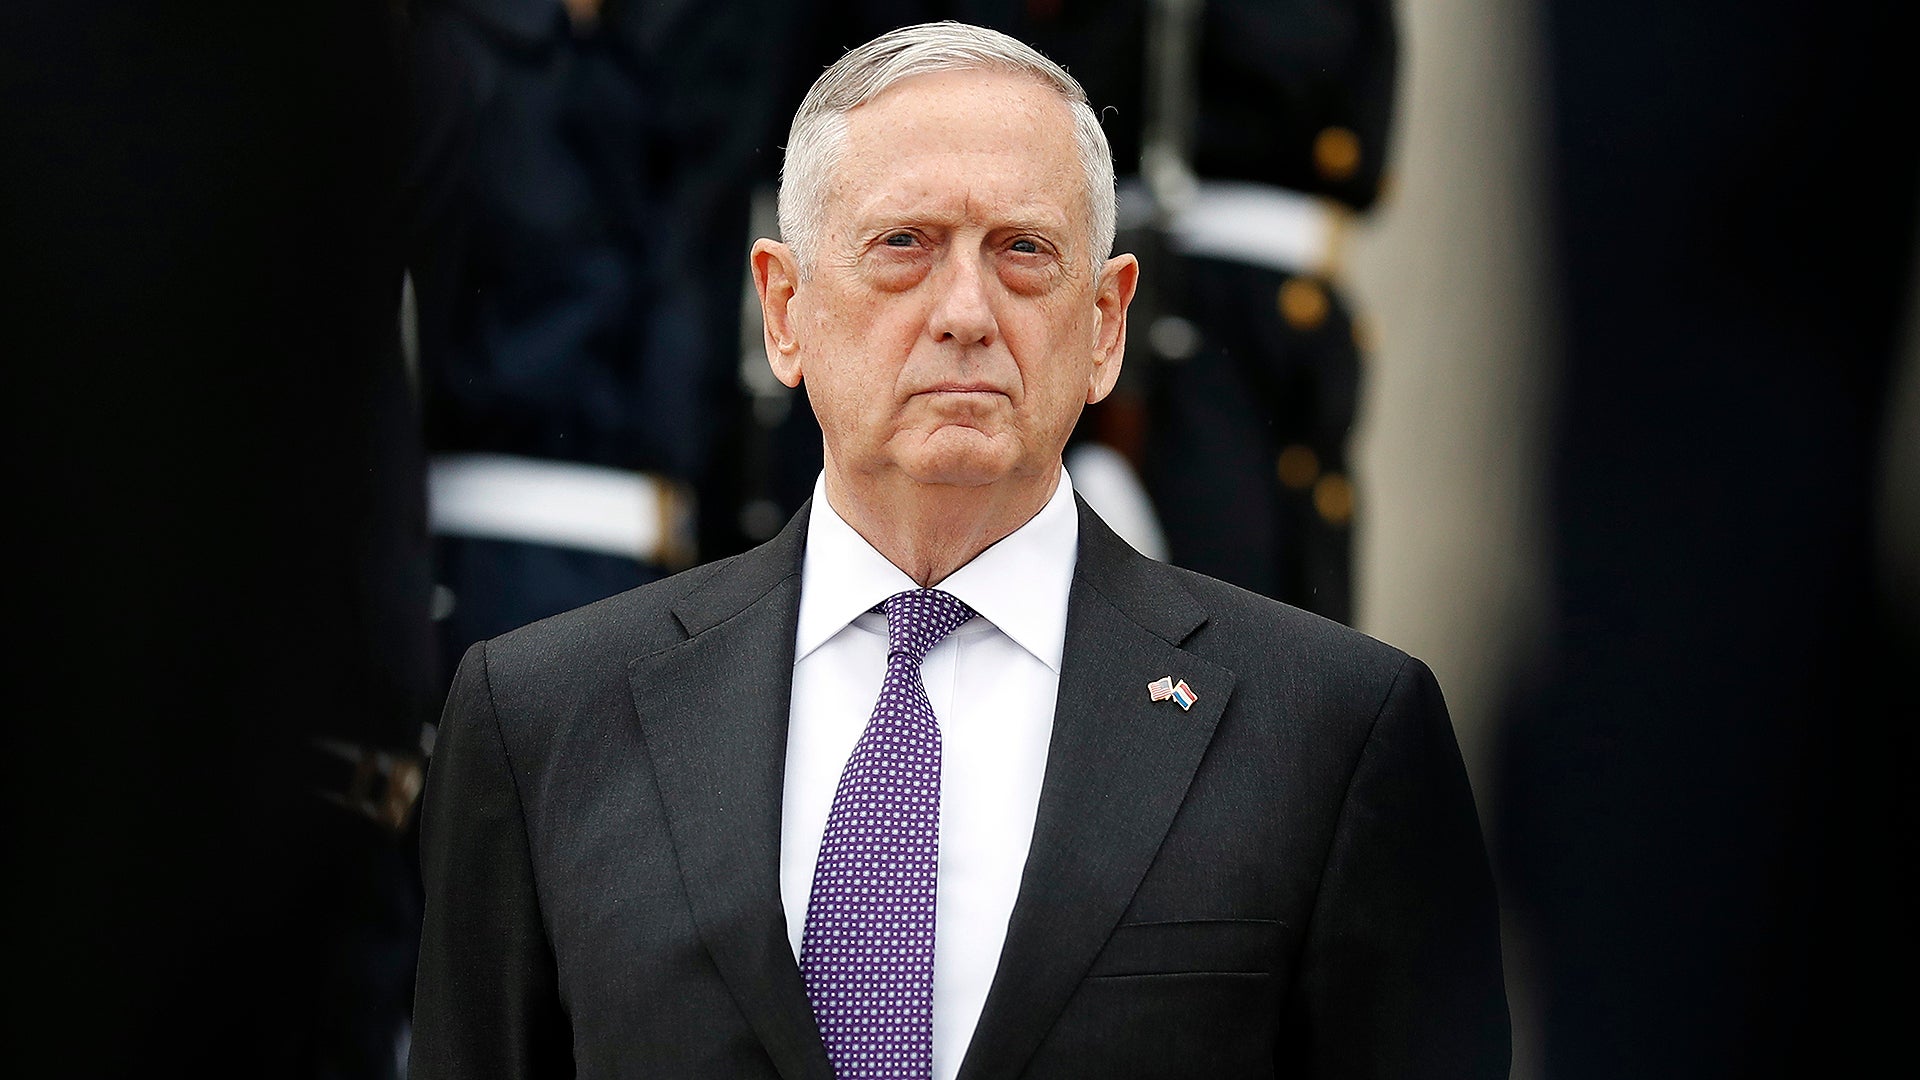 SecDef Mattis Candidly Talks Domestic Social Strife With Troops In Impromptu Speech